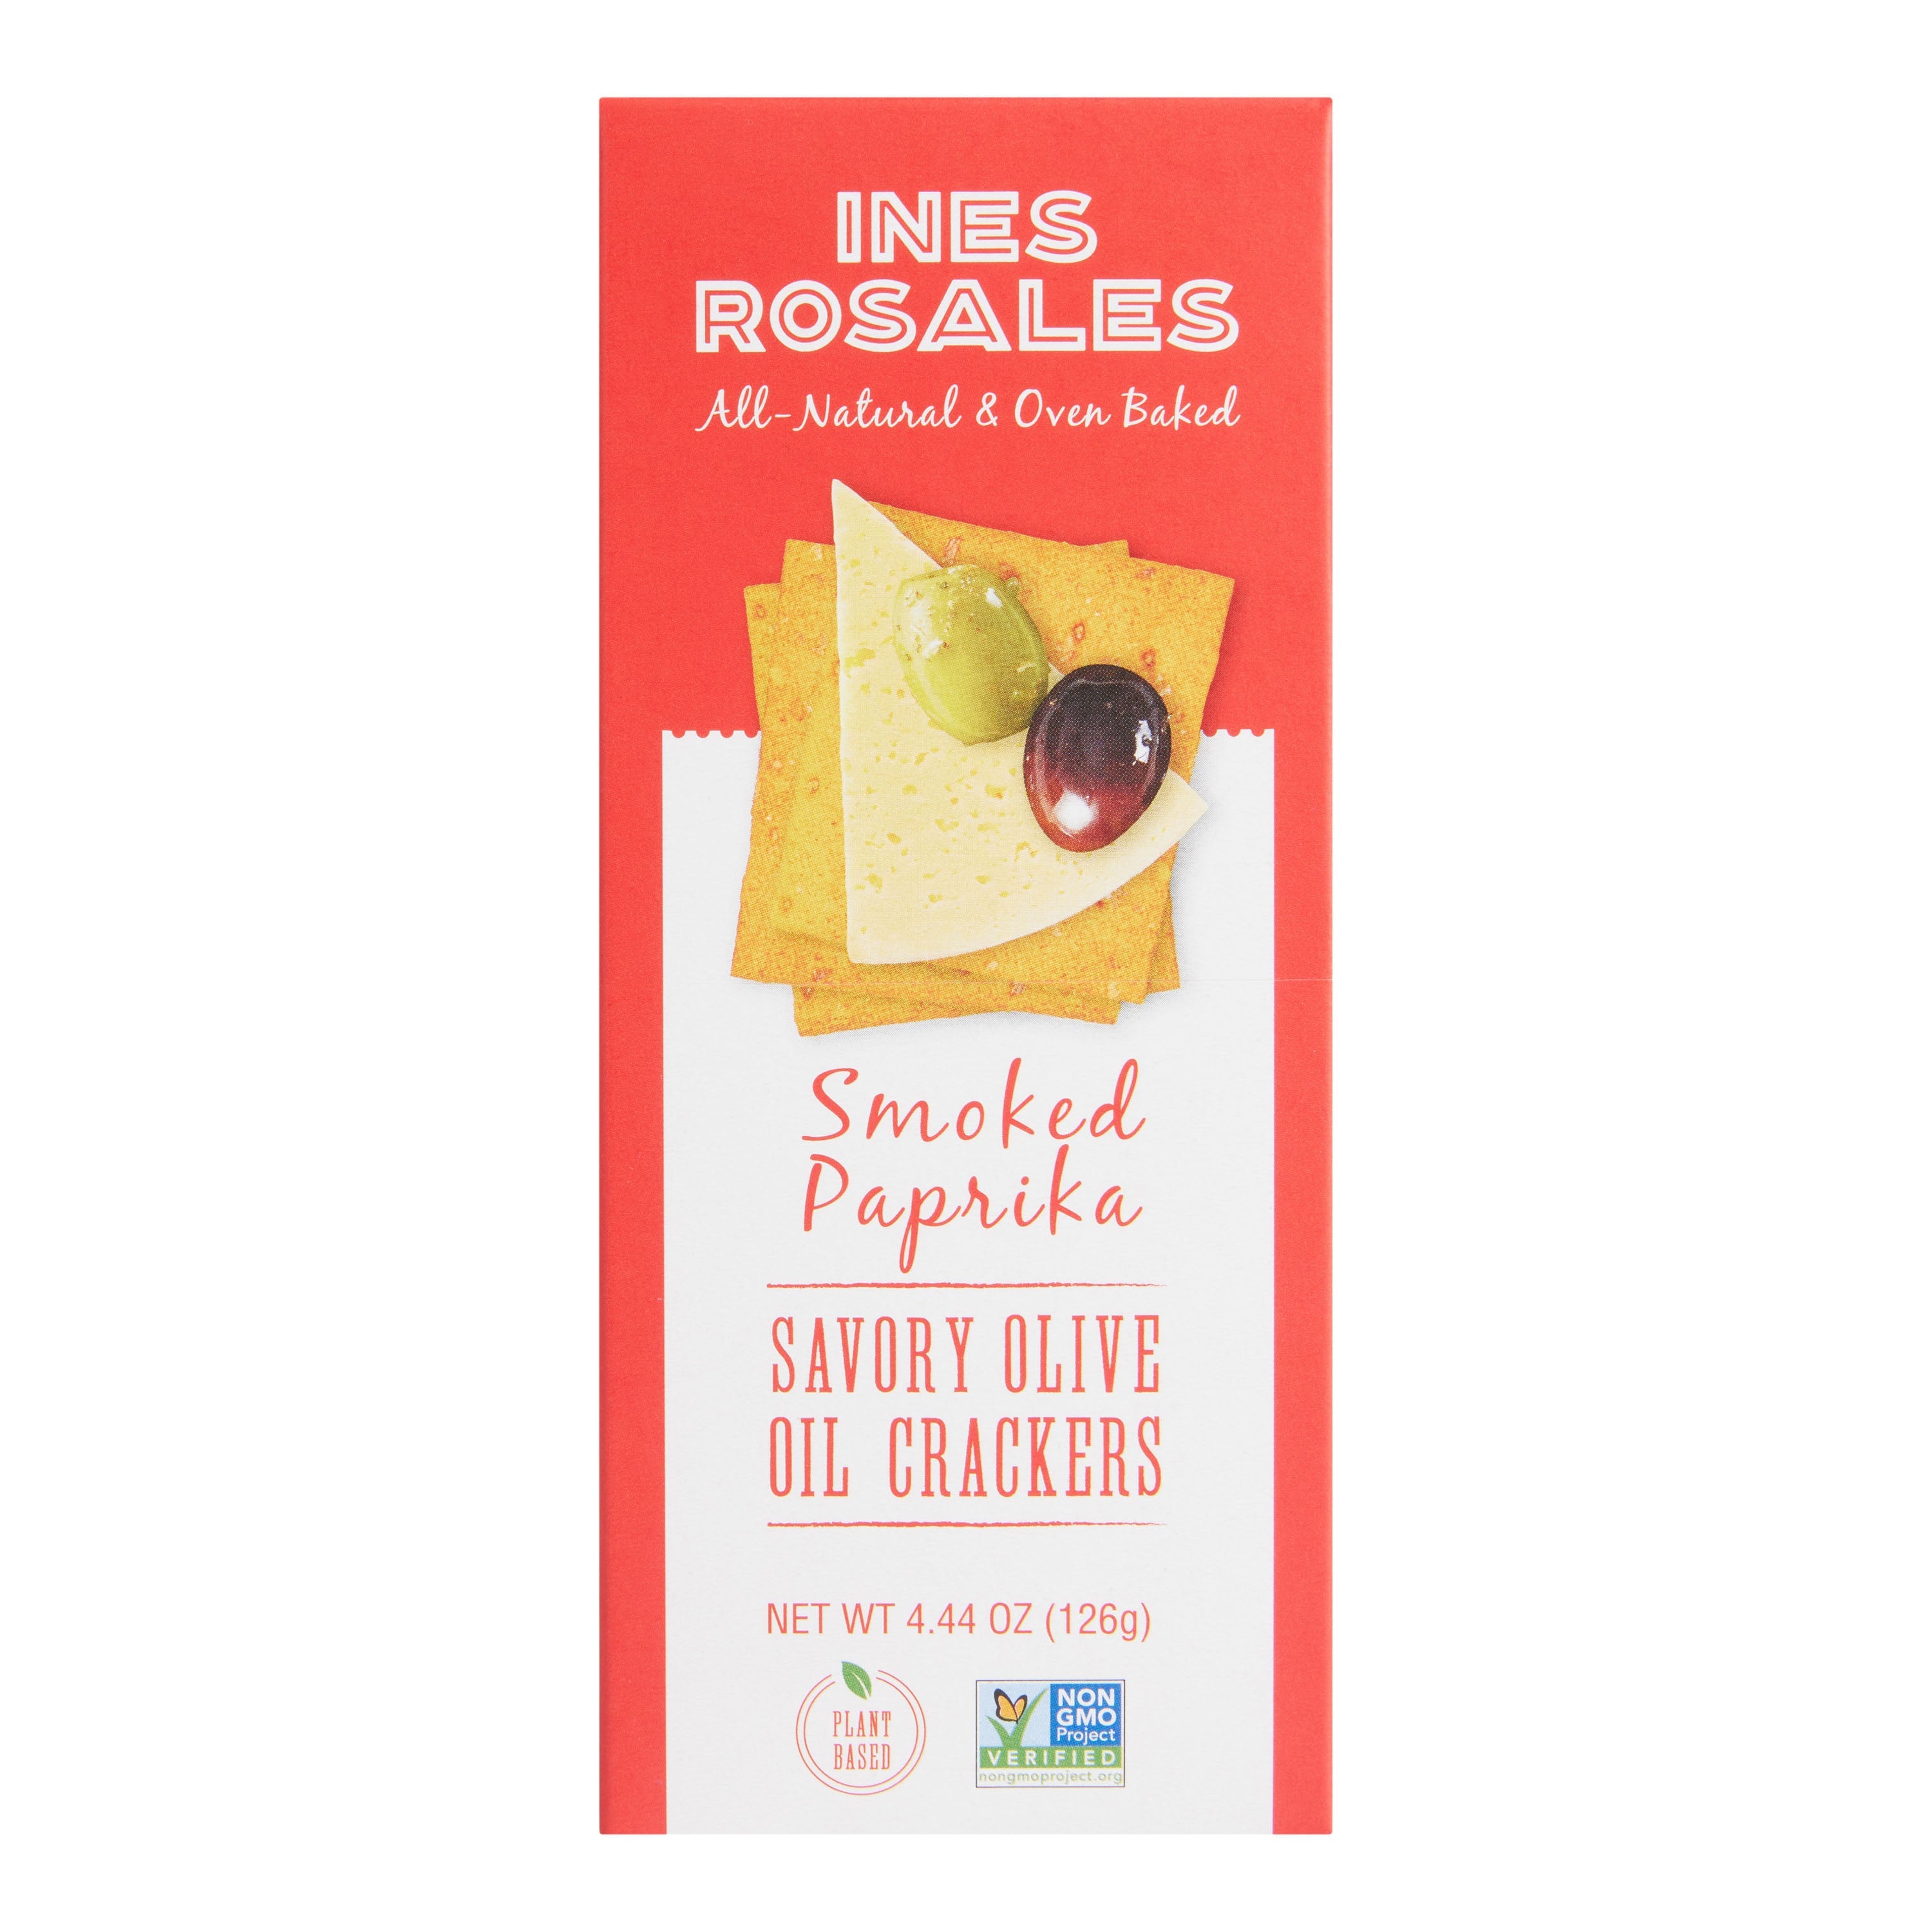 Ines Rosales Smoked Paprika Savory Olive Oil Crackers 4.44oz 12ct